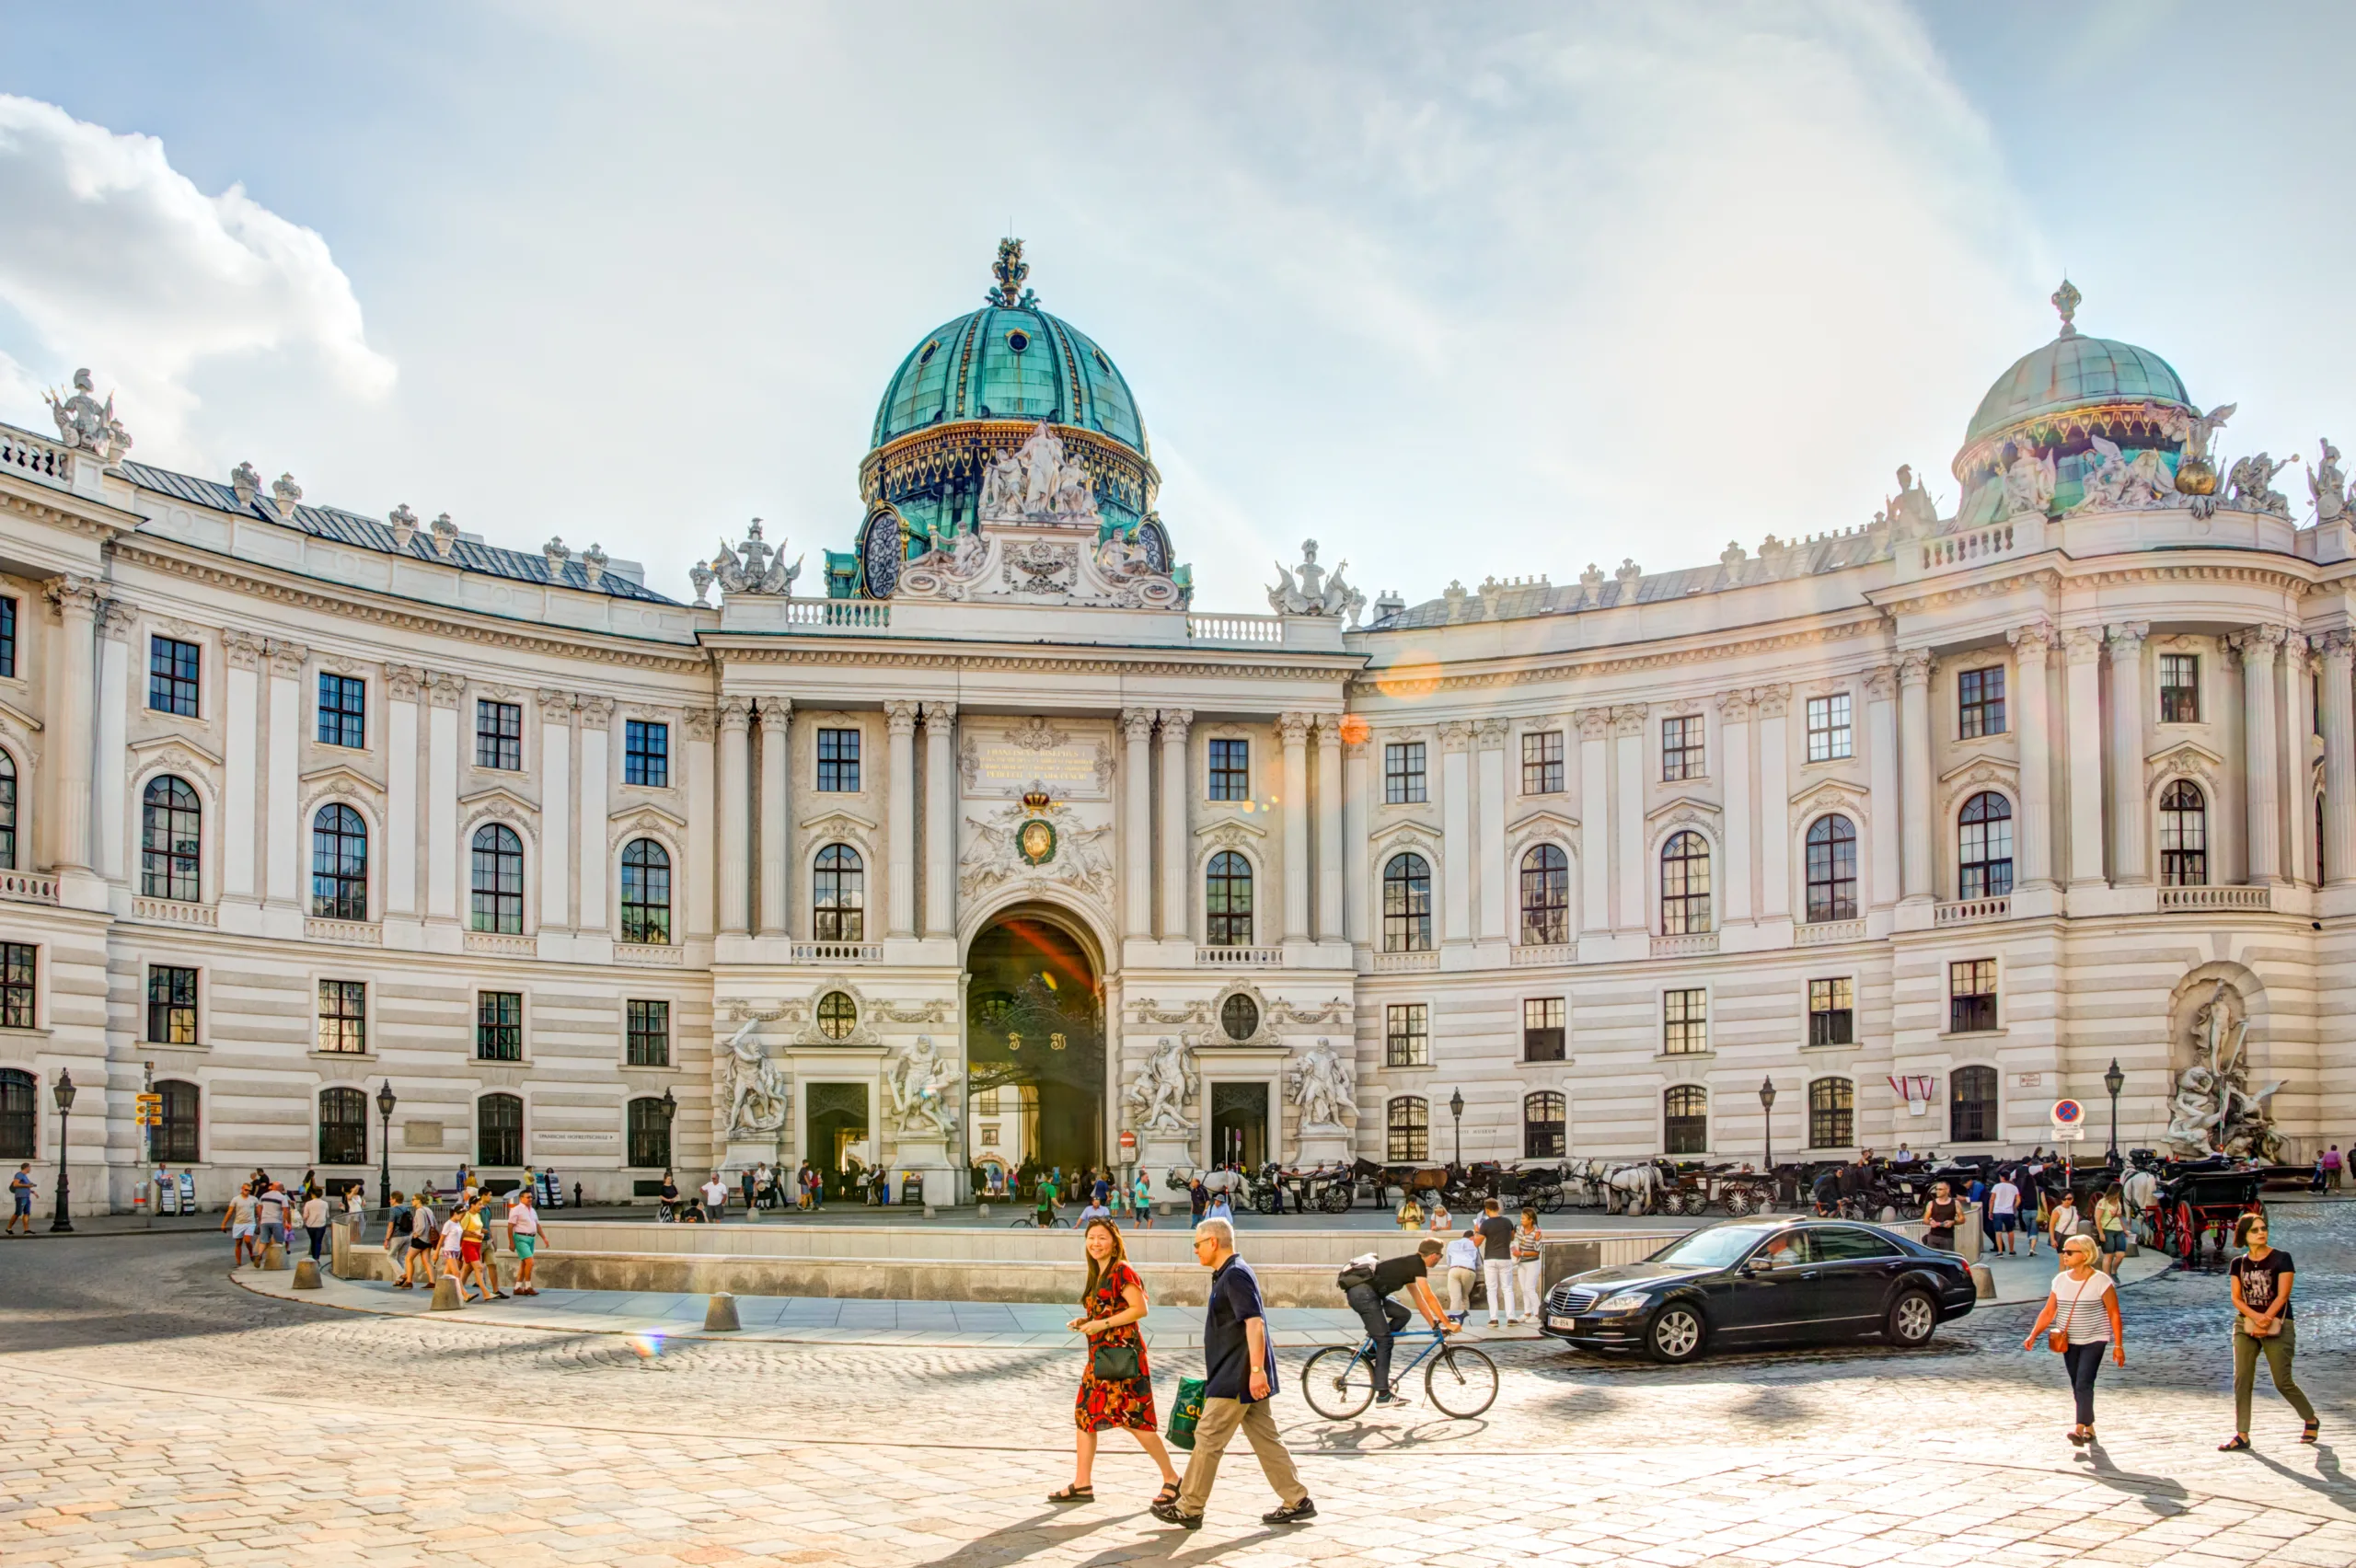 Tourists at the famous imperial Hofburg palace in Vienna, Austria